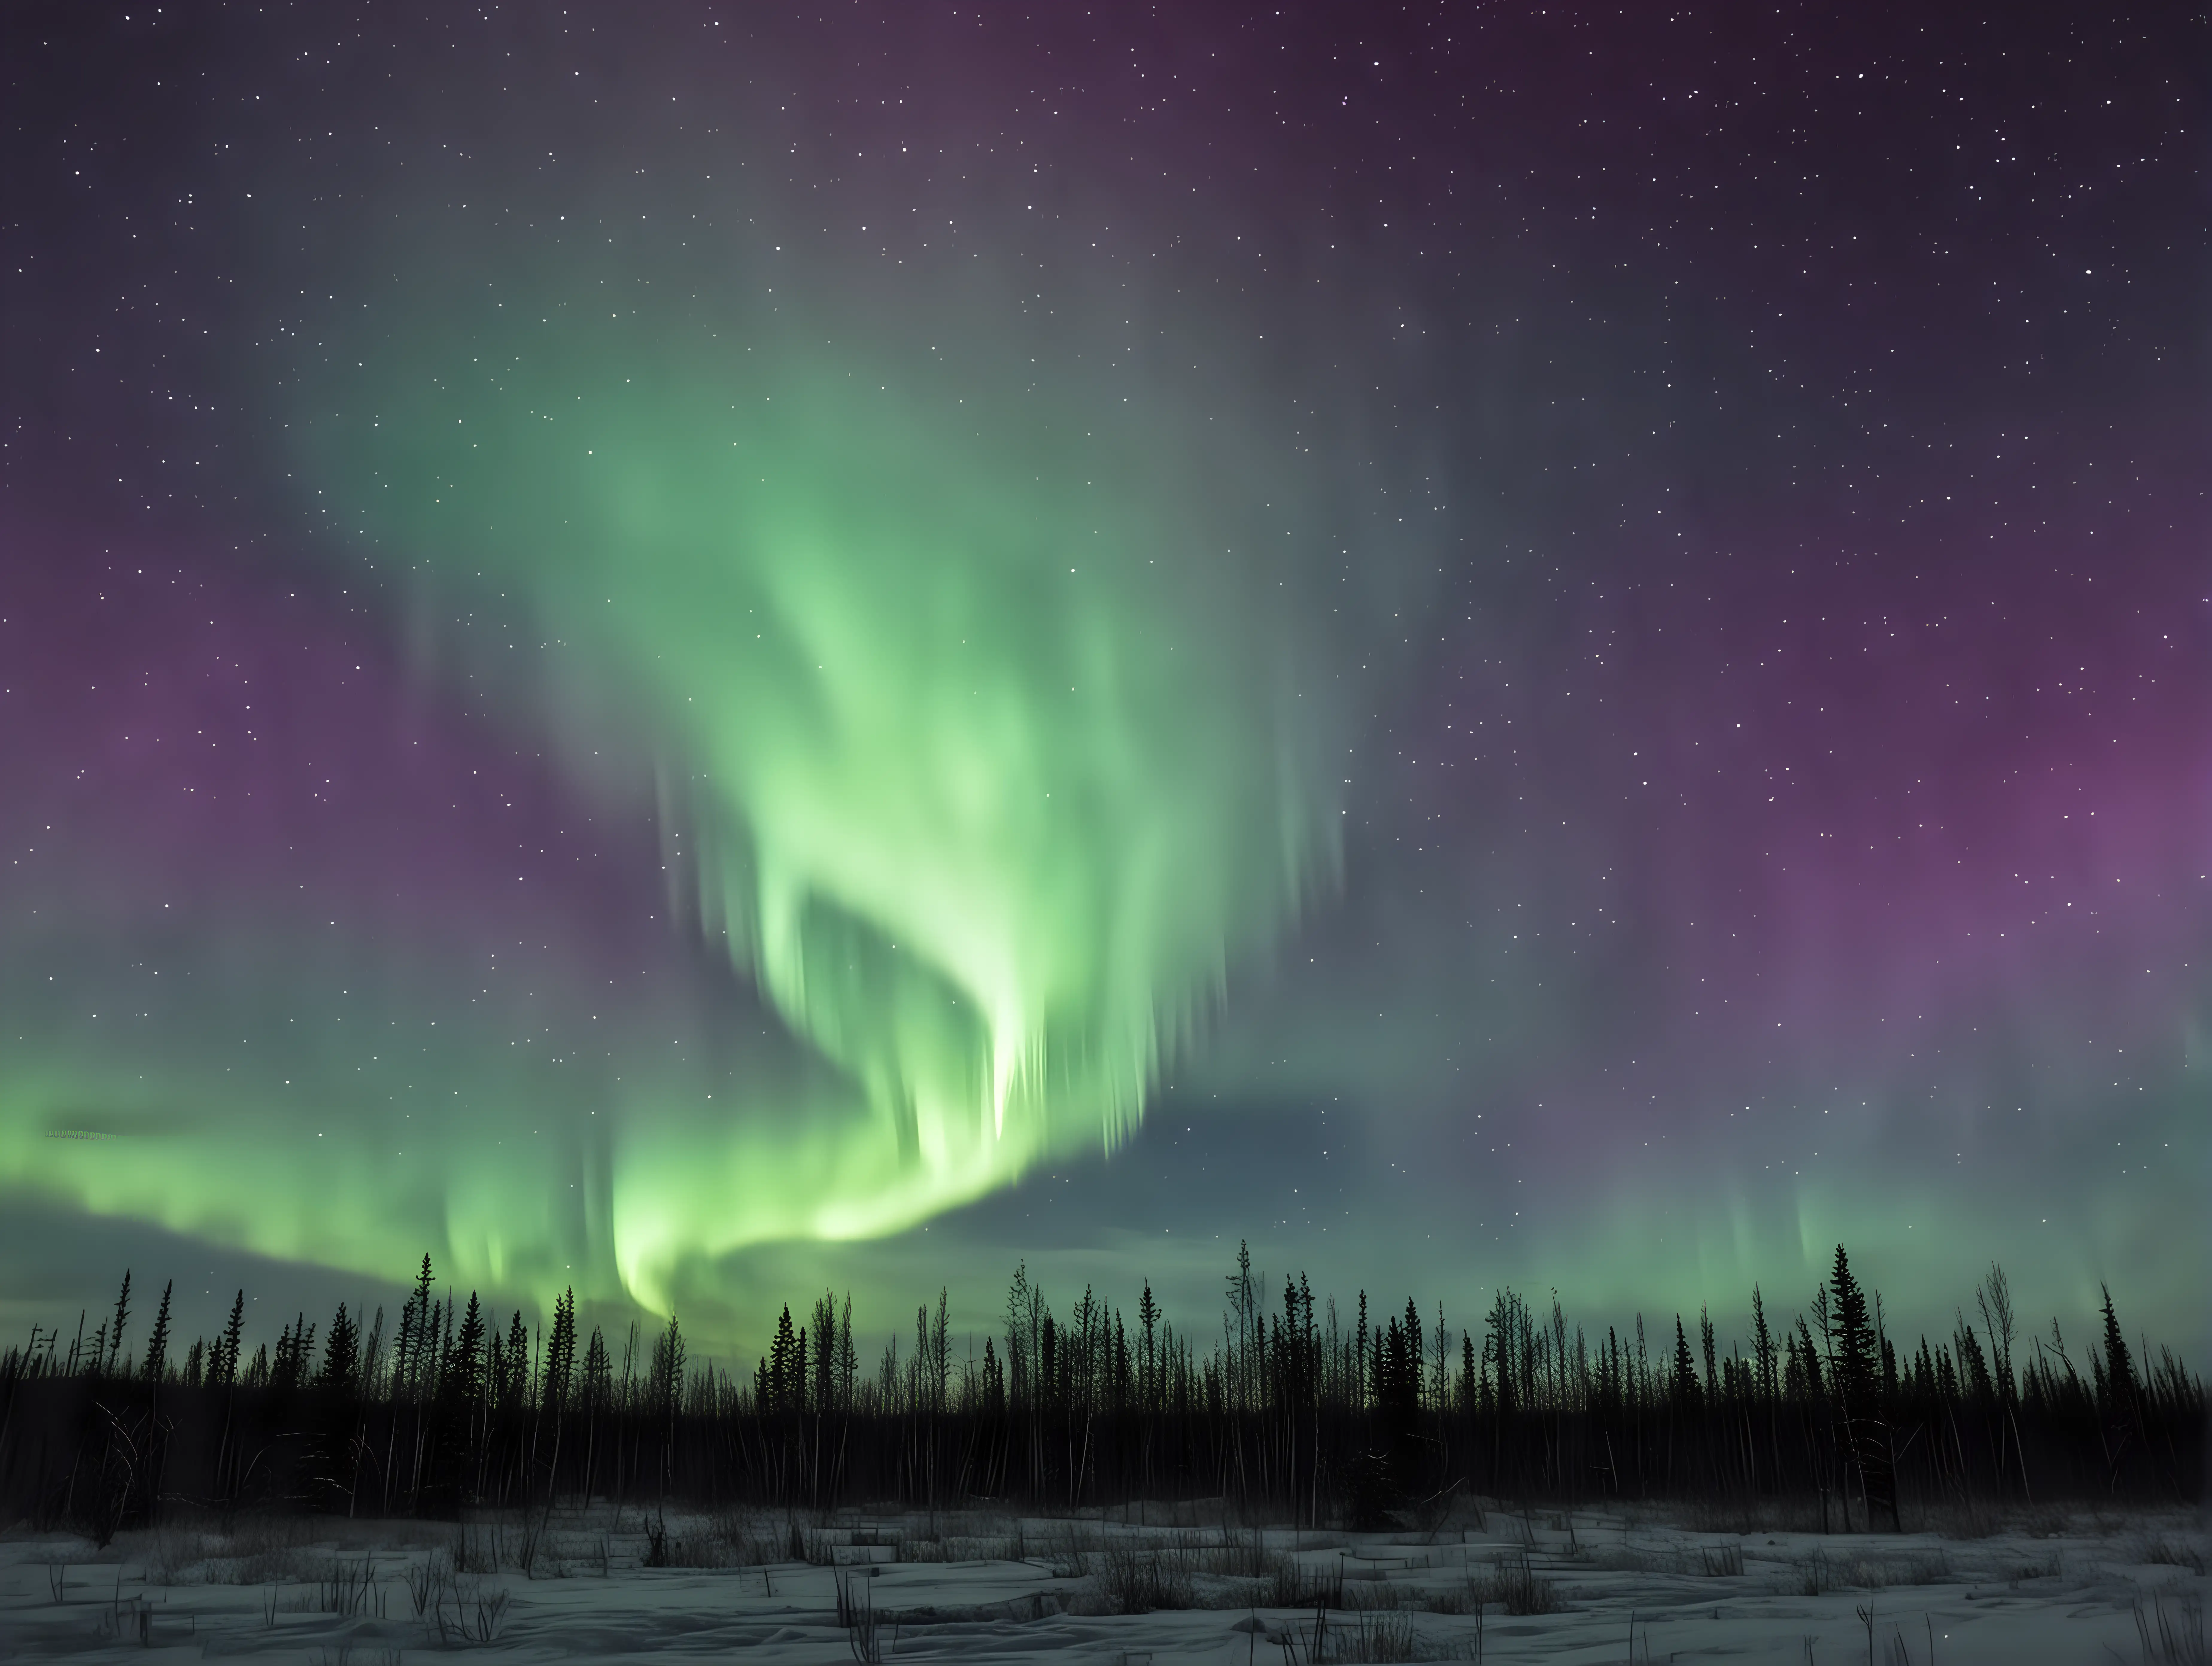 sky only view of northern lights with purplish and greenish color.  sky only NO GROUND NO LAND